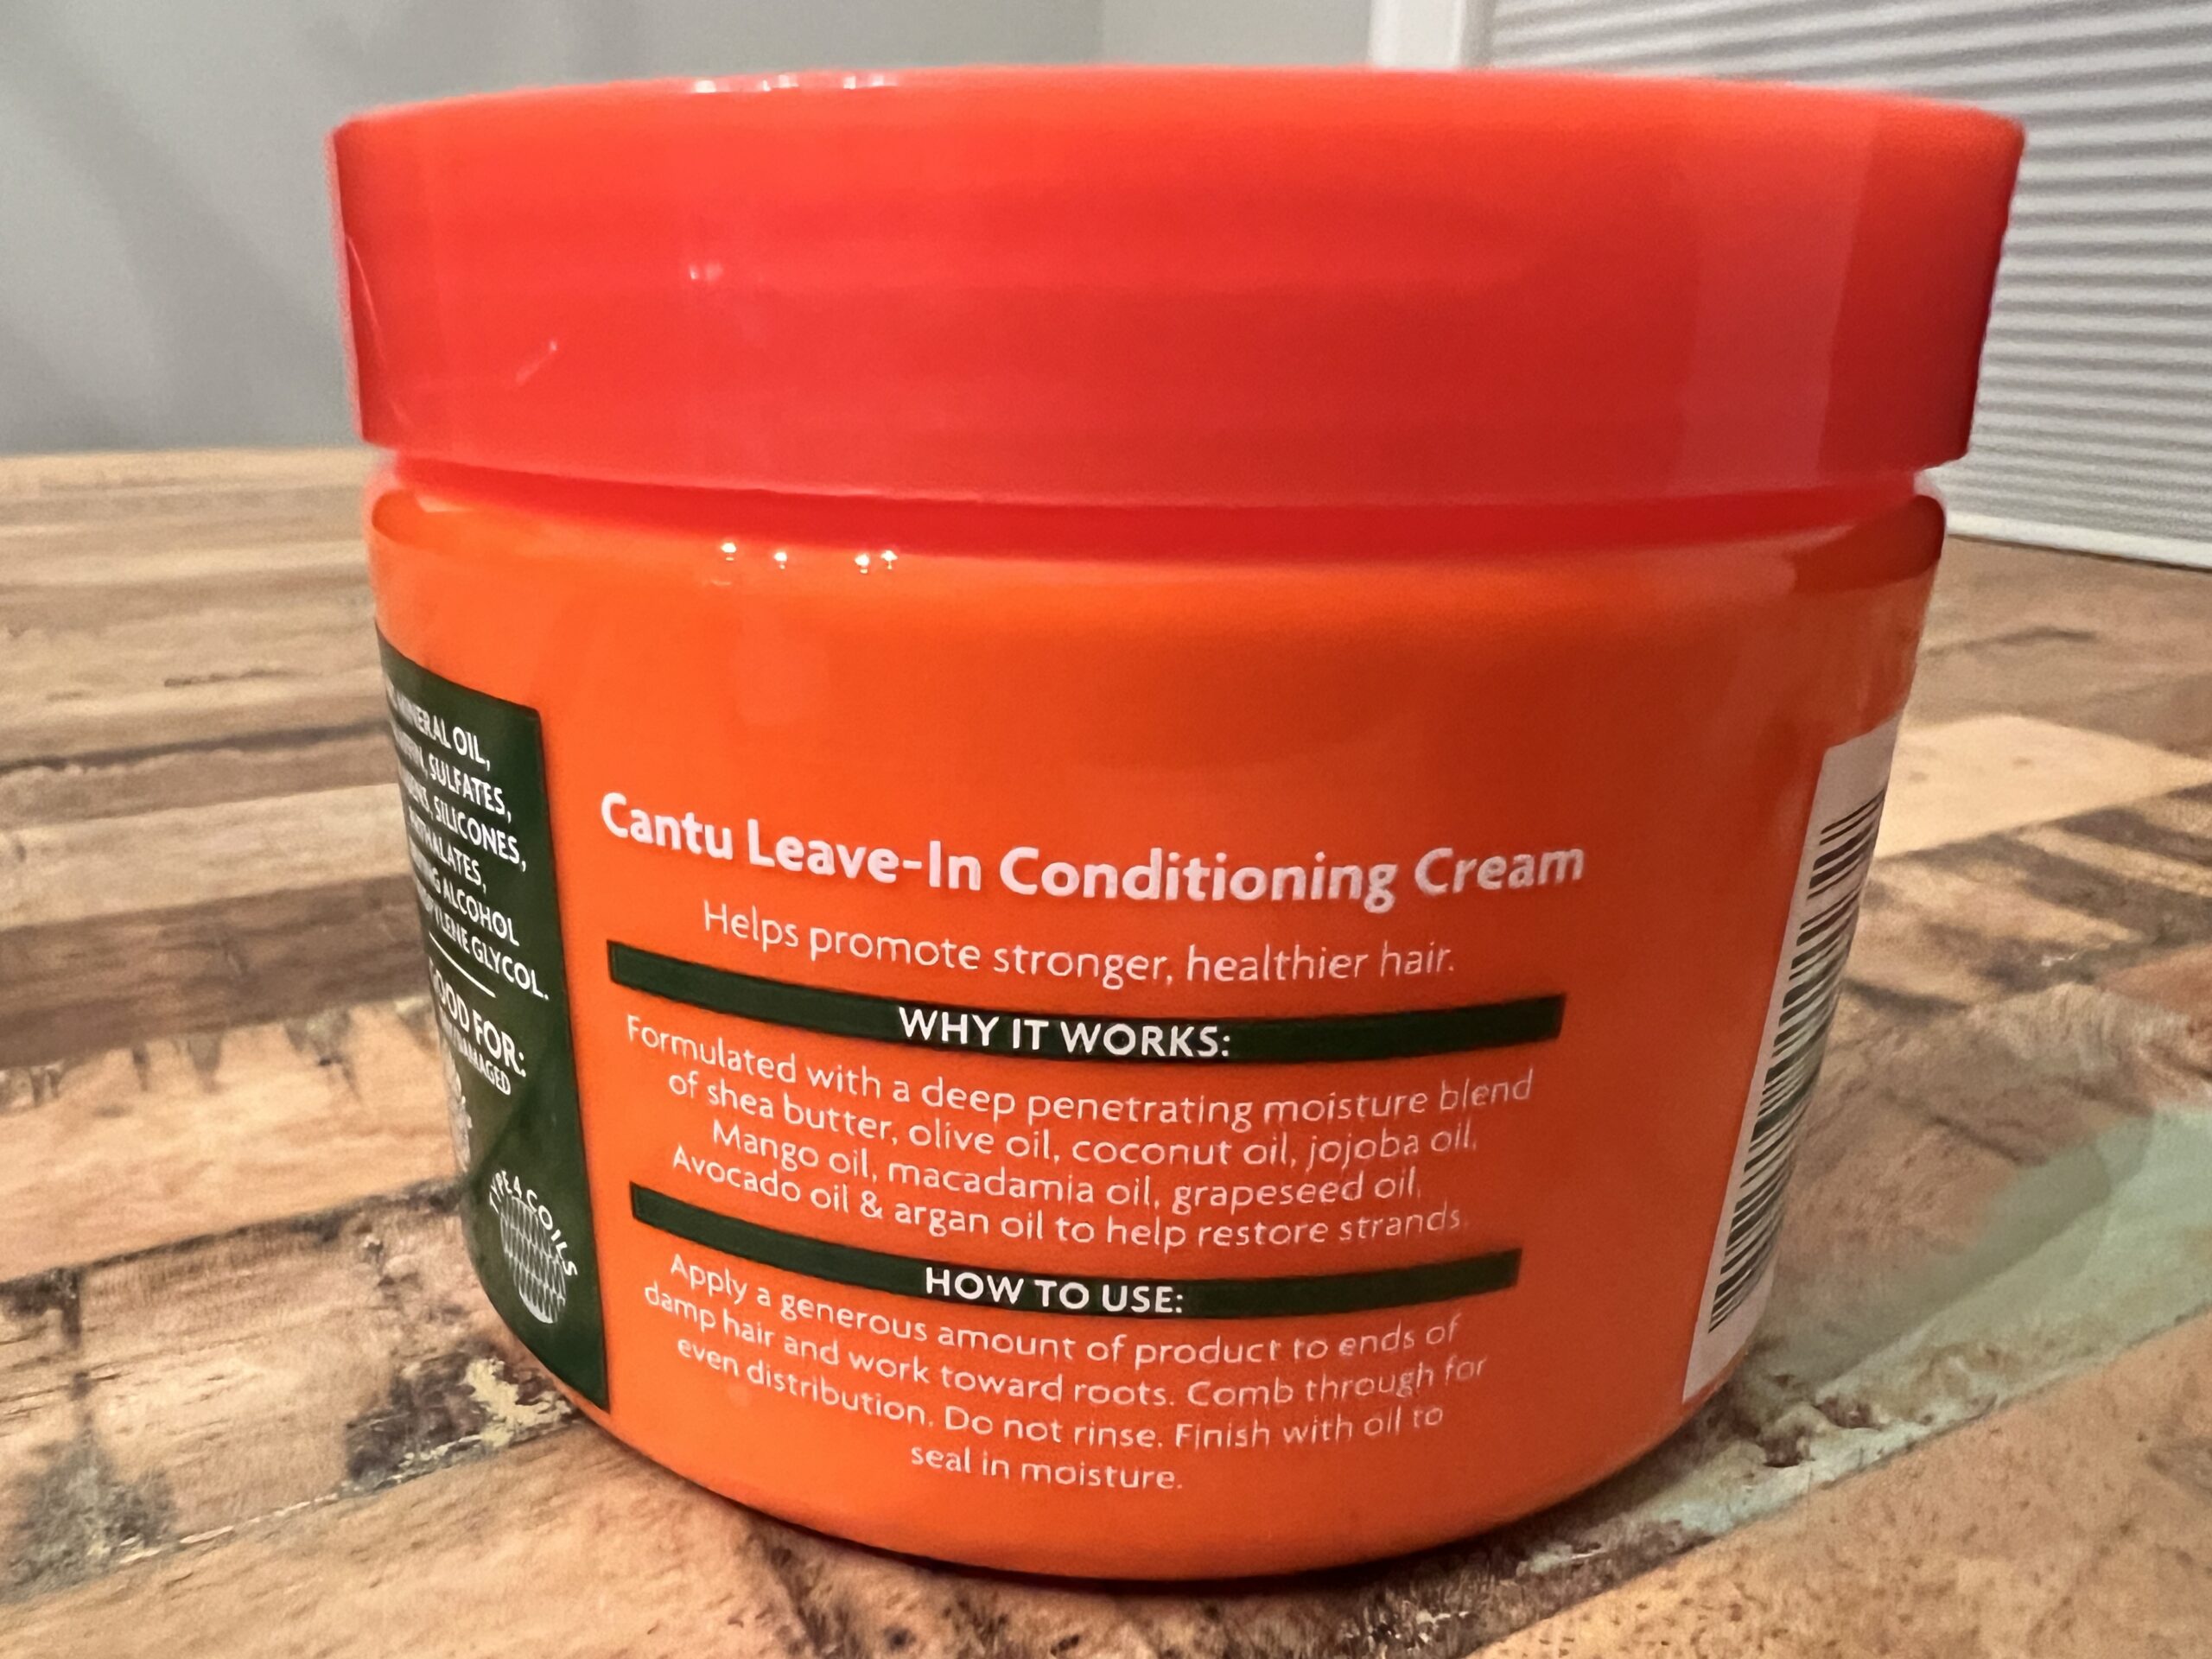 Hands applying Cantu Shea Butter Leave-In Conditioning Cream to hair, showcasing its use for repairing and softening hair.